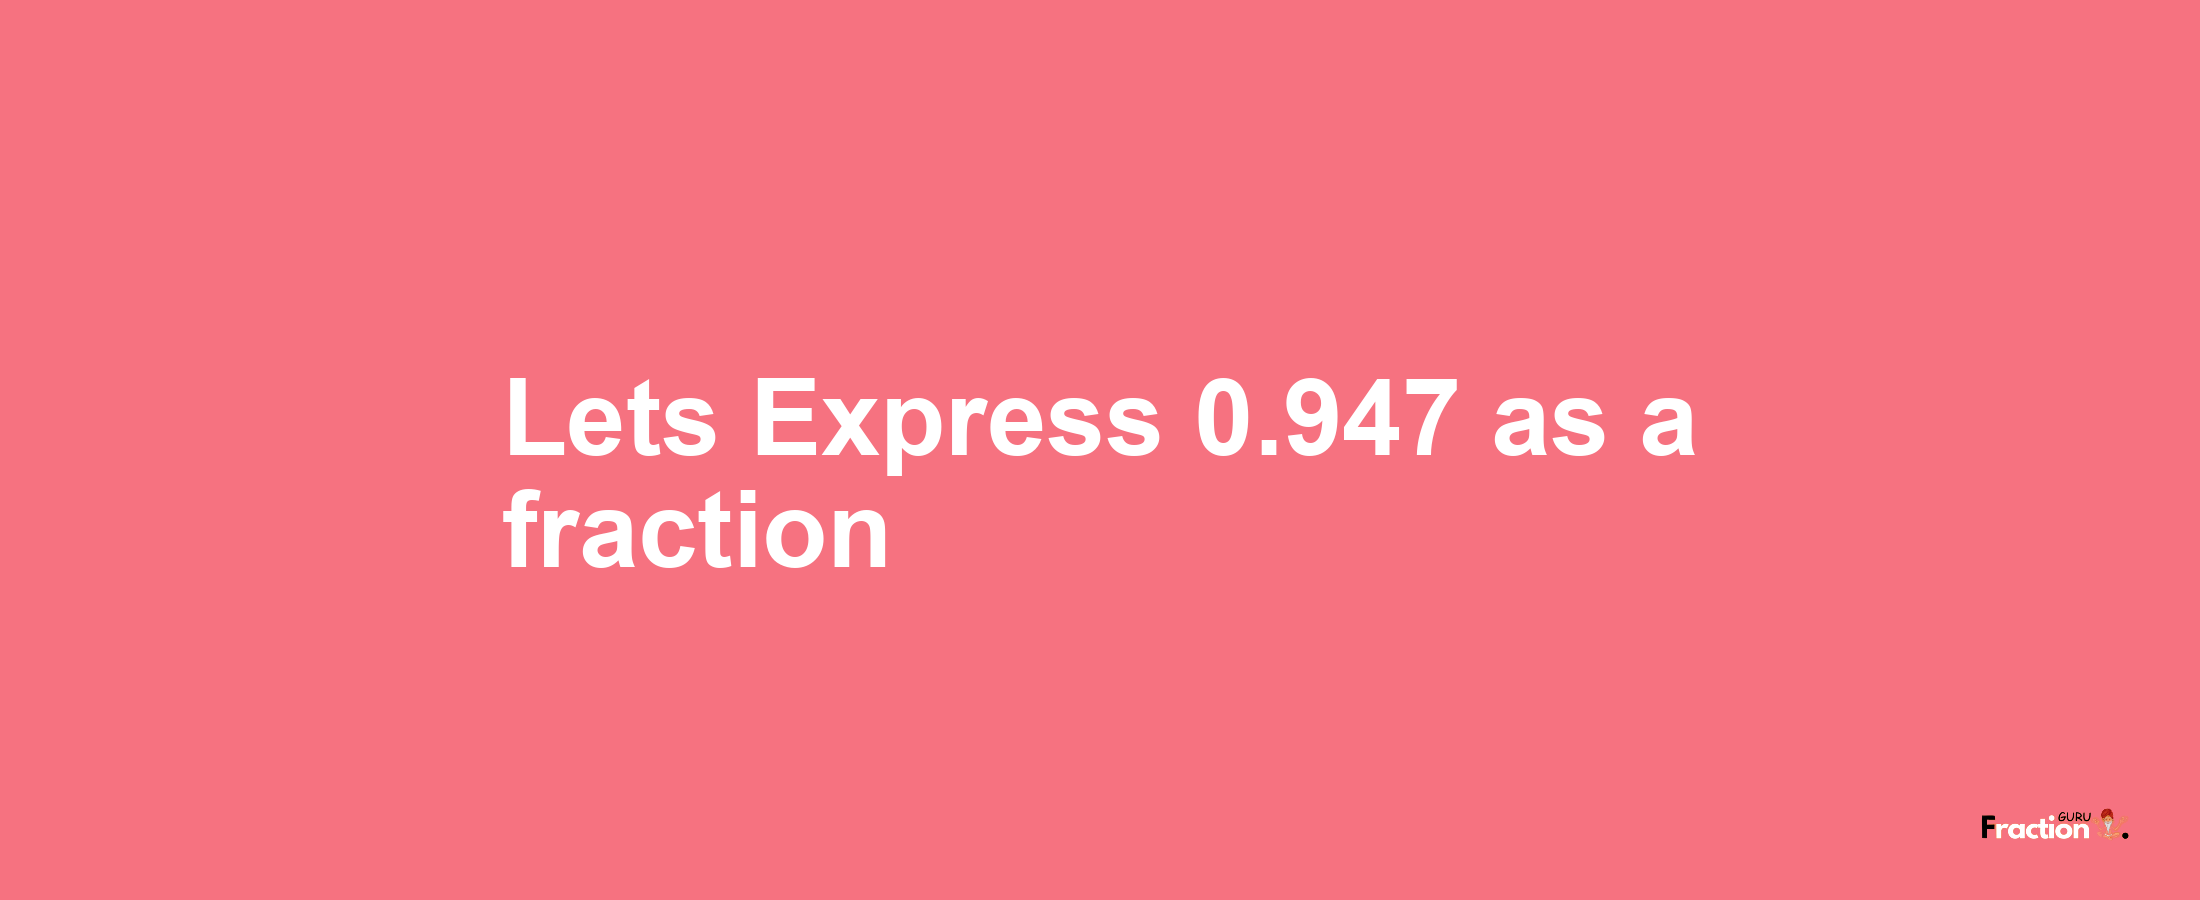 Lets Express 0.947 as afraction